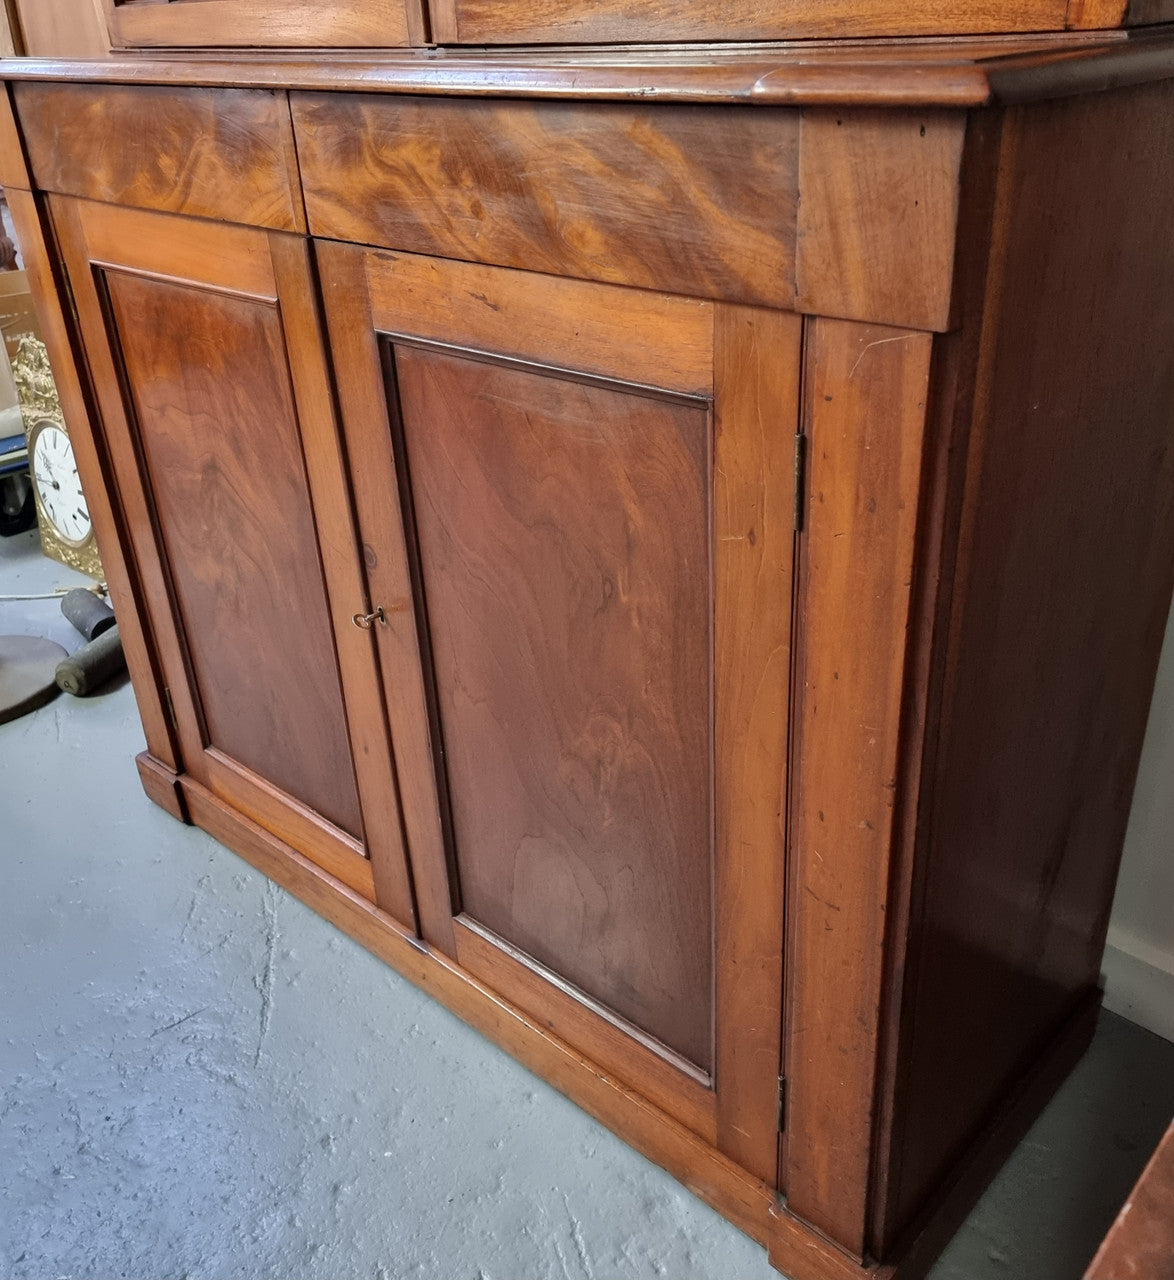 Rare early Australian colonial full Cedar bookcase. Plenty of storage underneath and glass top doors open up too three fully adjustable shelves. In good restored condition.